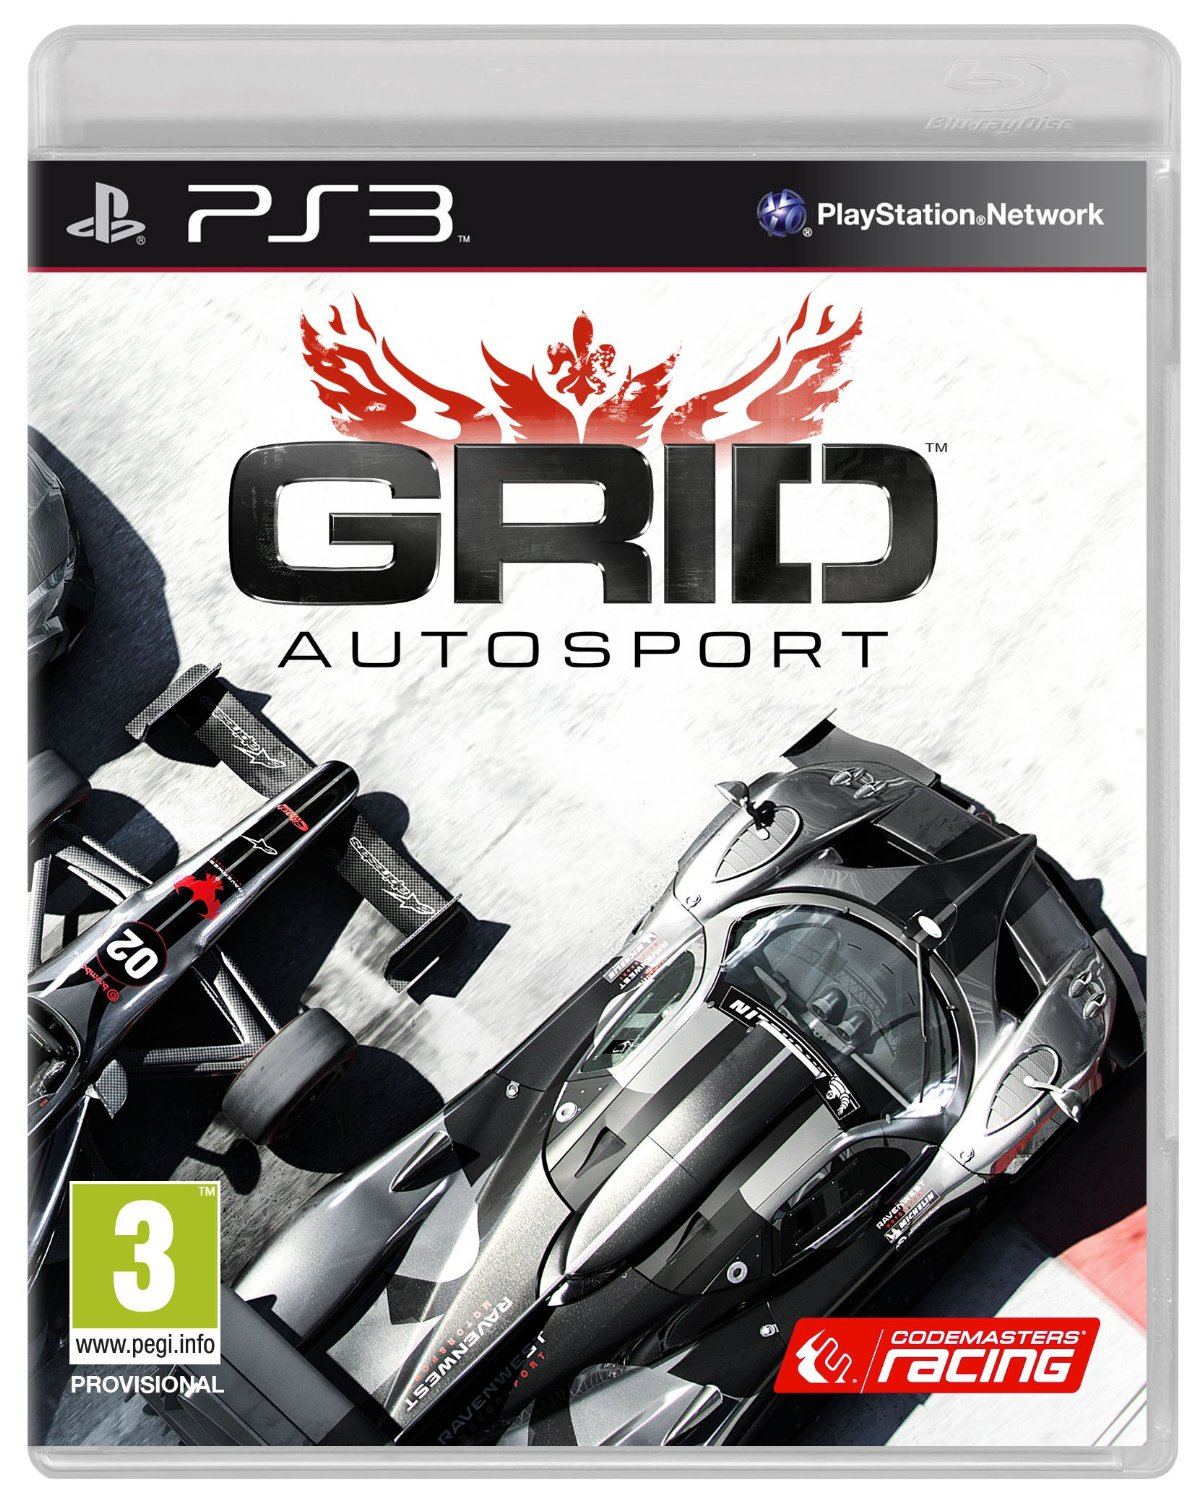 Buy GRID Autosport for PlayStation 3